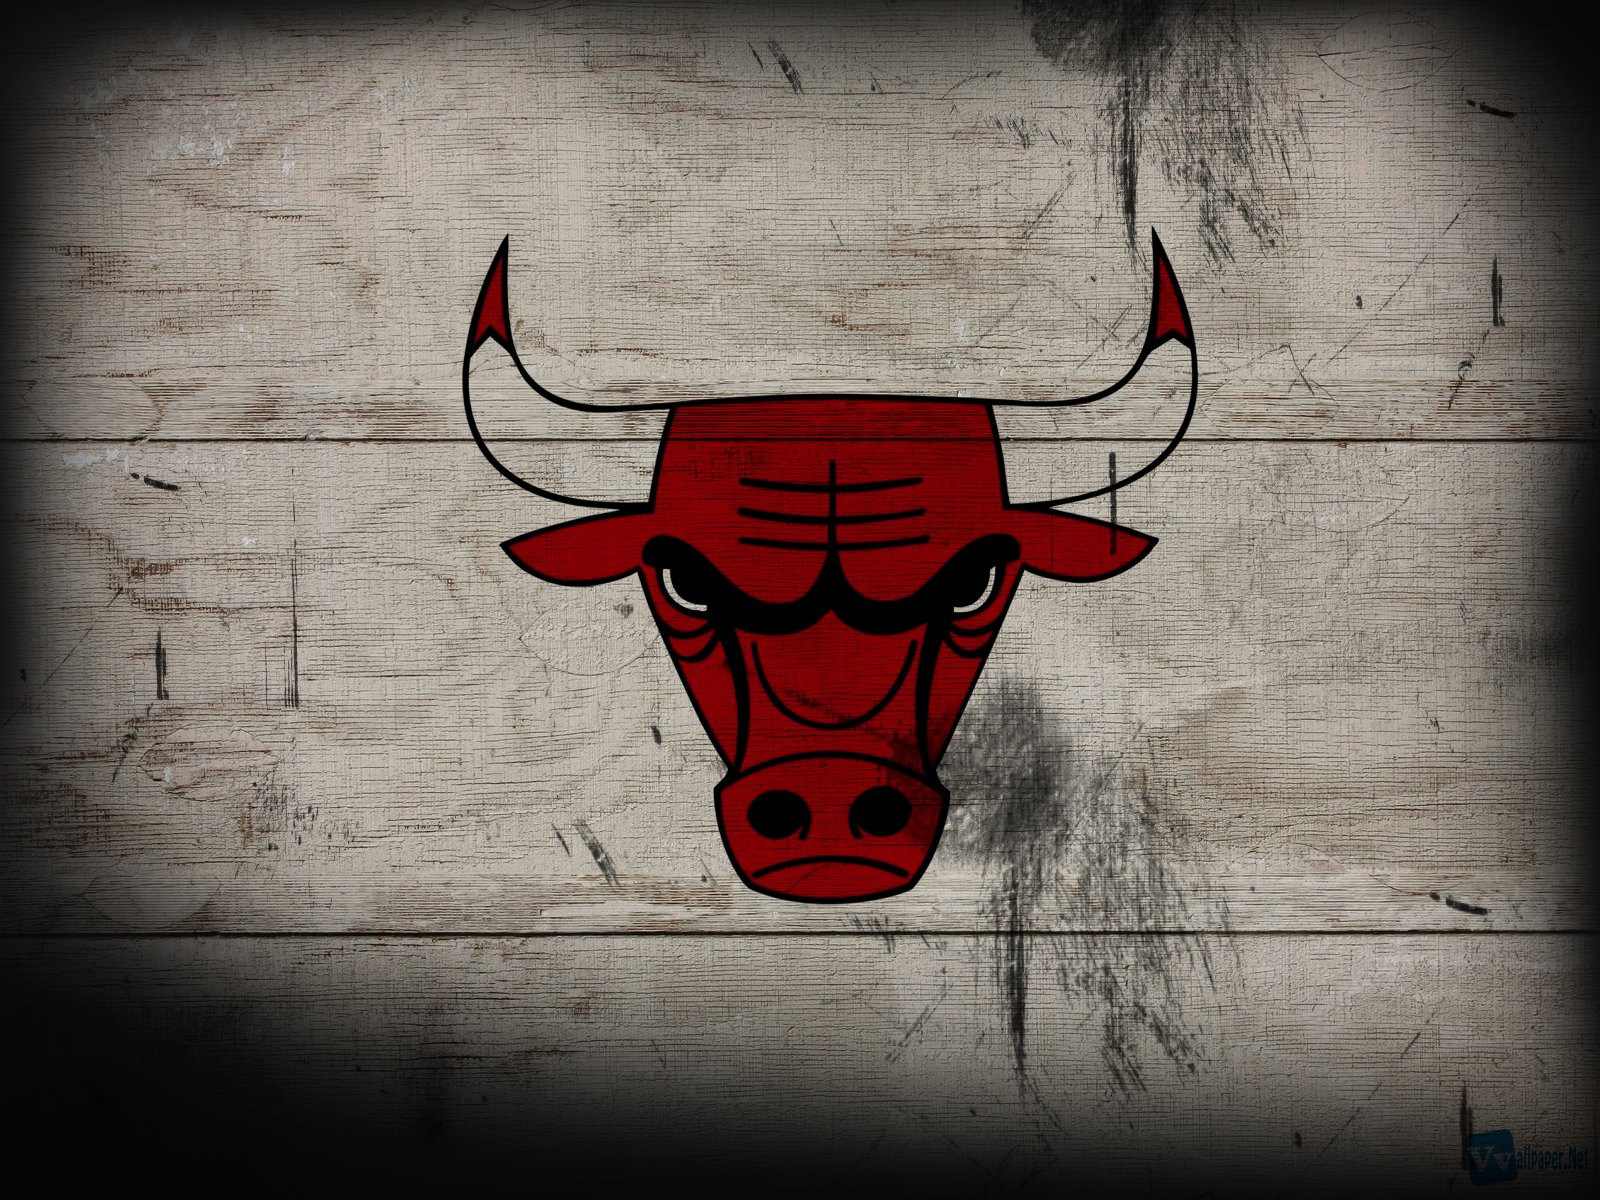  HD Wallpapers HD Wallpapers Chicago Bulls Logo Black Background